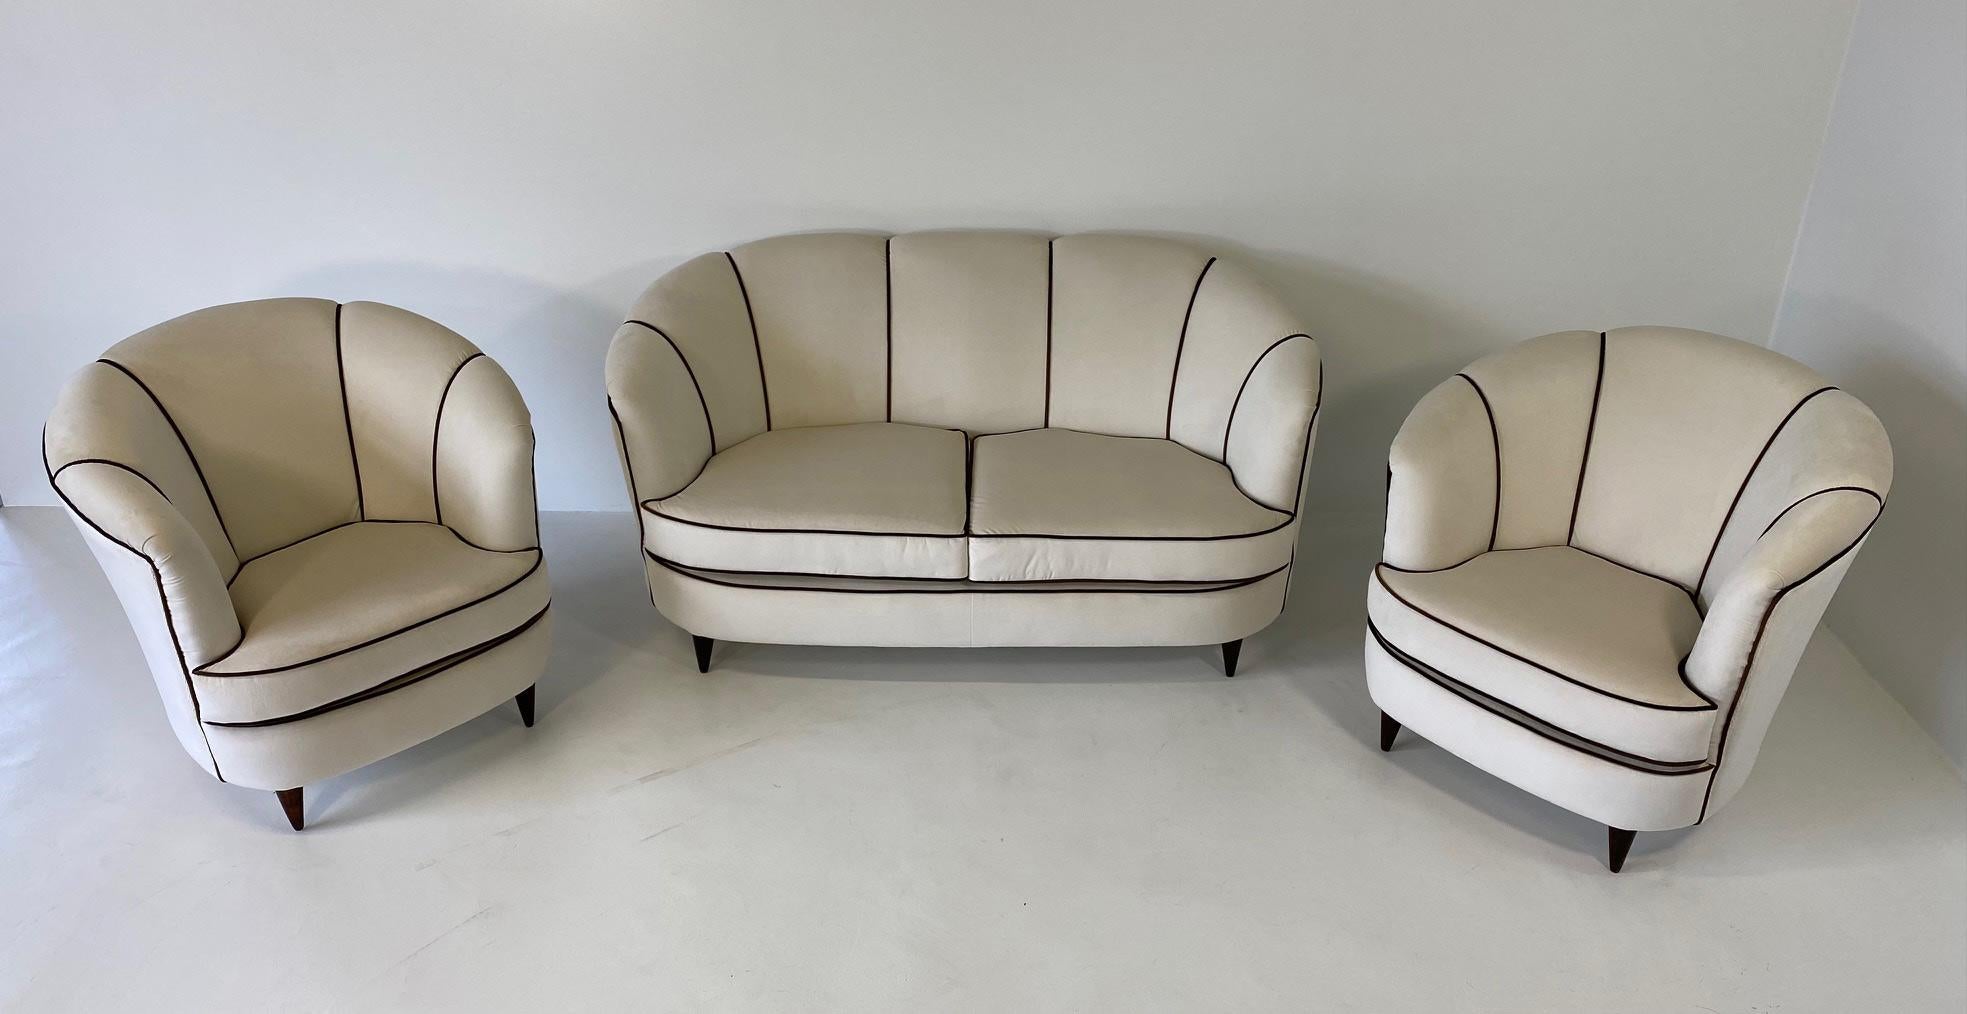 Mid-20th Century Italian Art Deco Set of Beige and Brown Velvet Armchairs and Sofa, 1940s